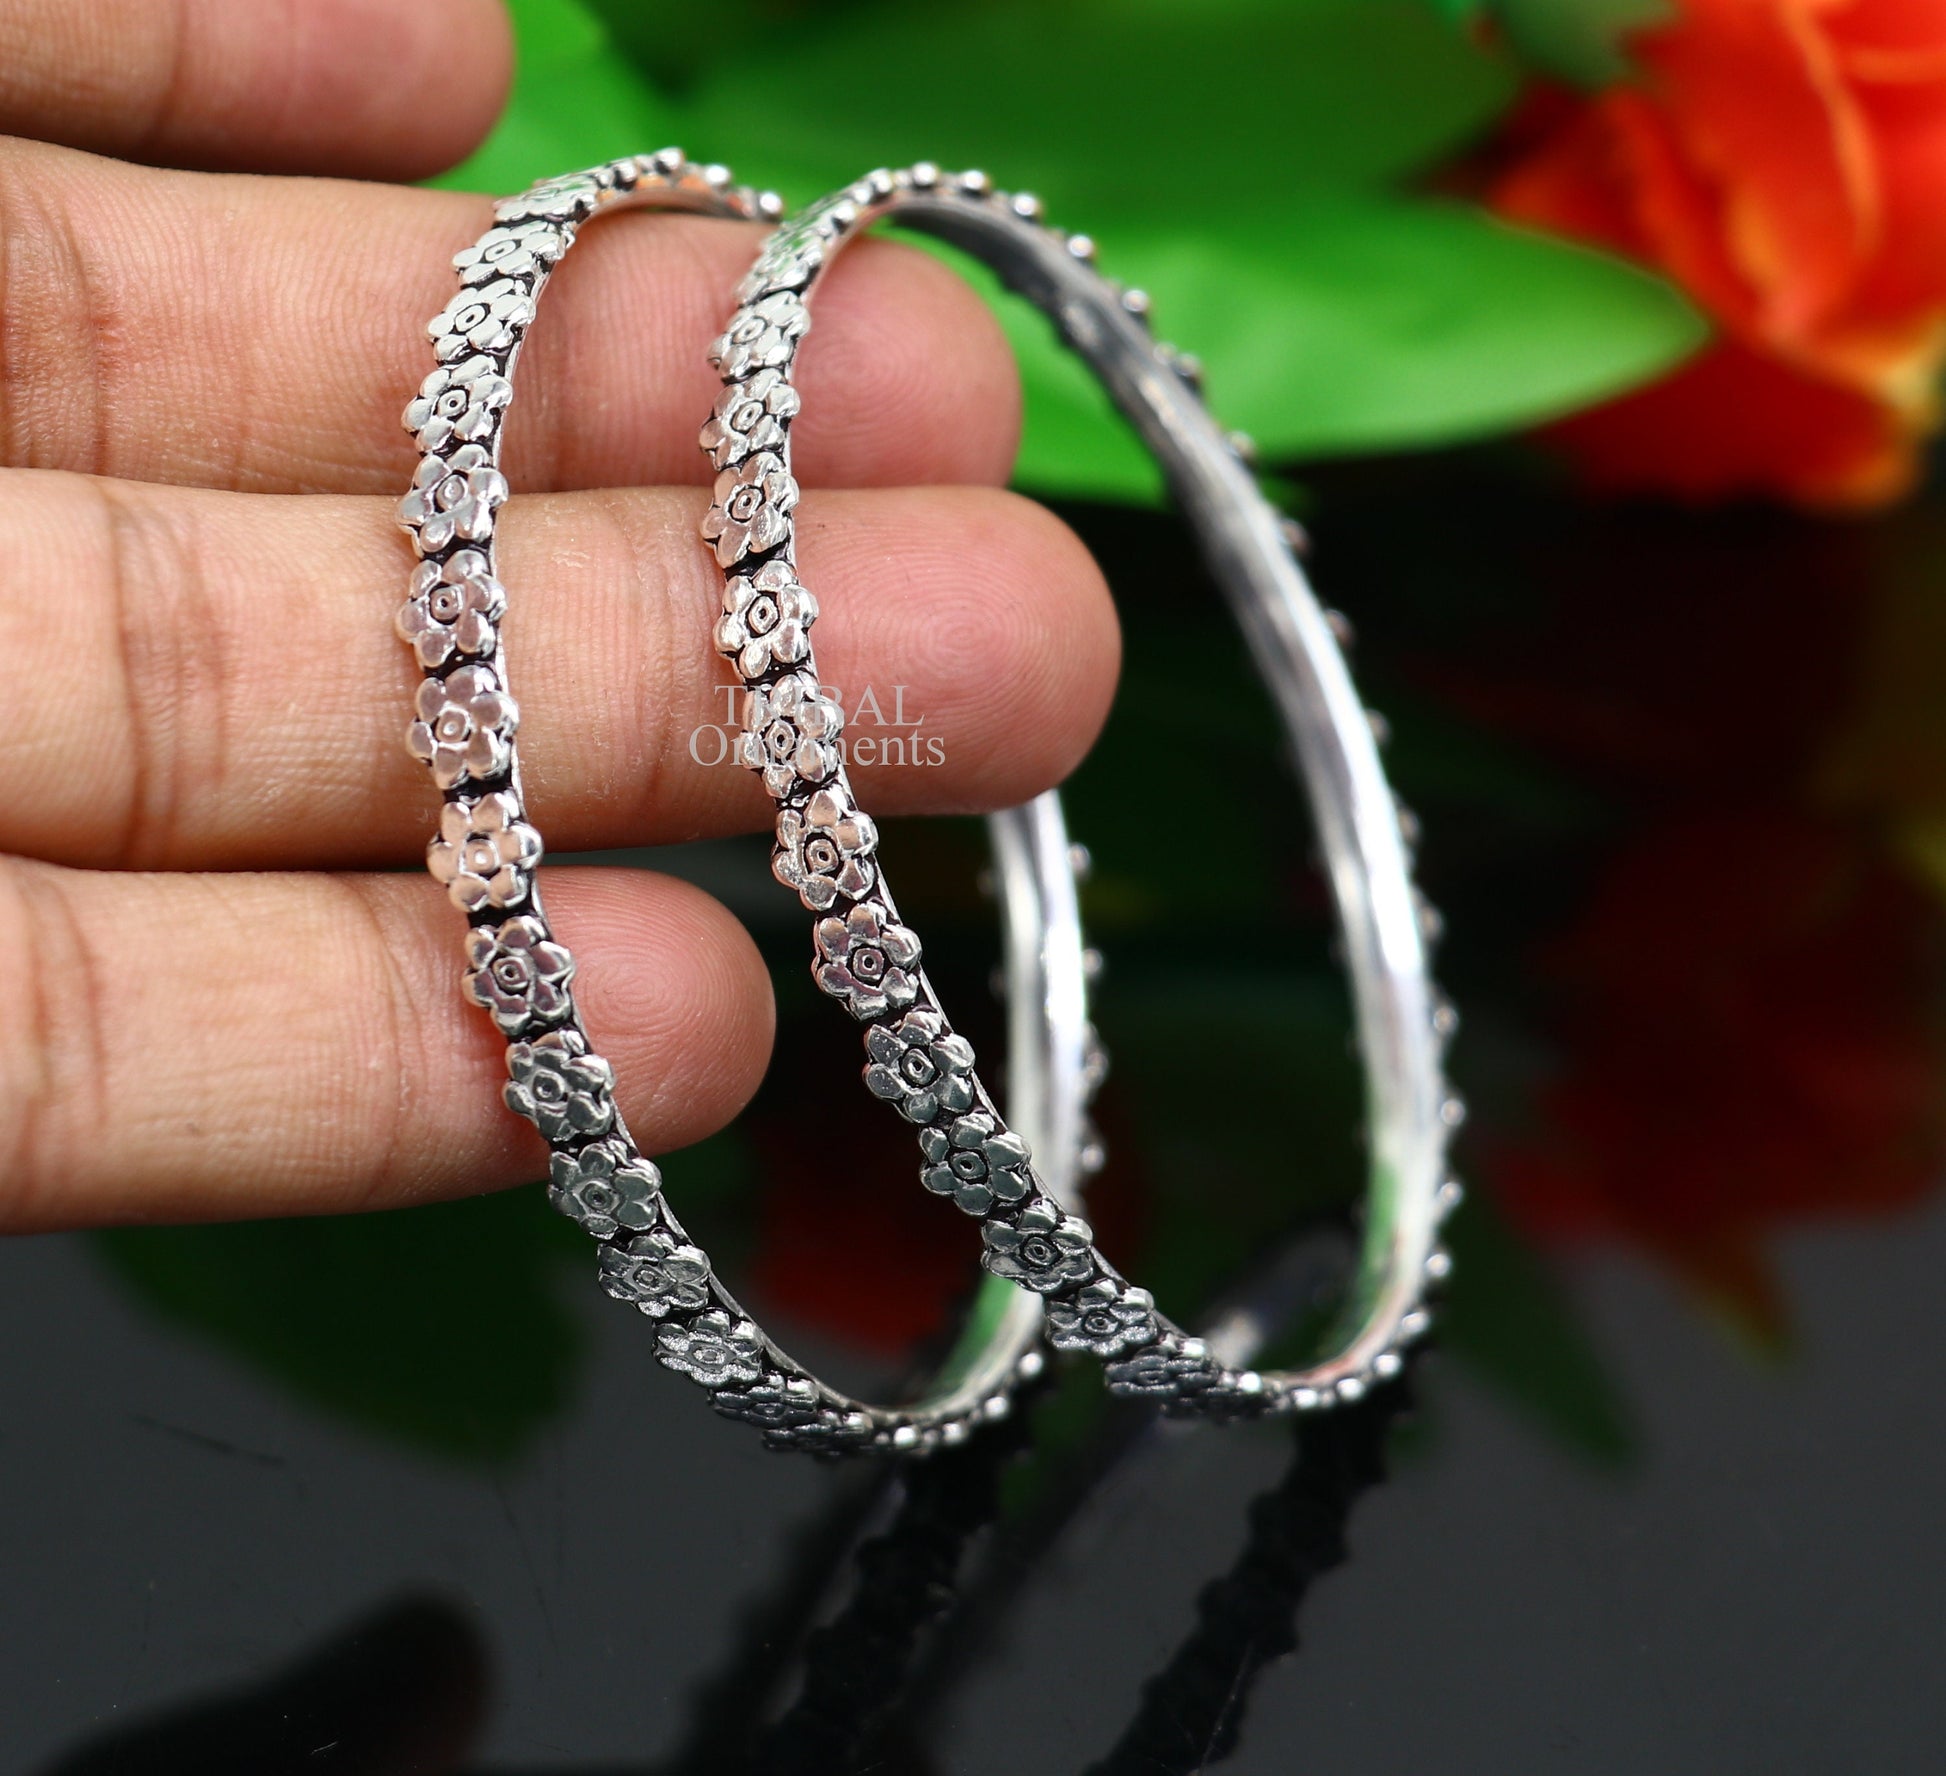 925 sterling silver handmade floral design fabulous bangle bracelet, best brides silver jewelry gifting girl's bangles nba331 - TRIBAL ORNAMENTS